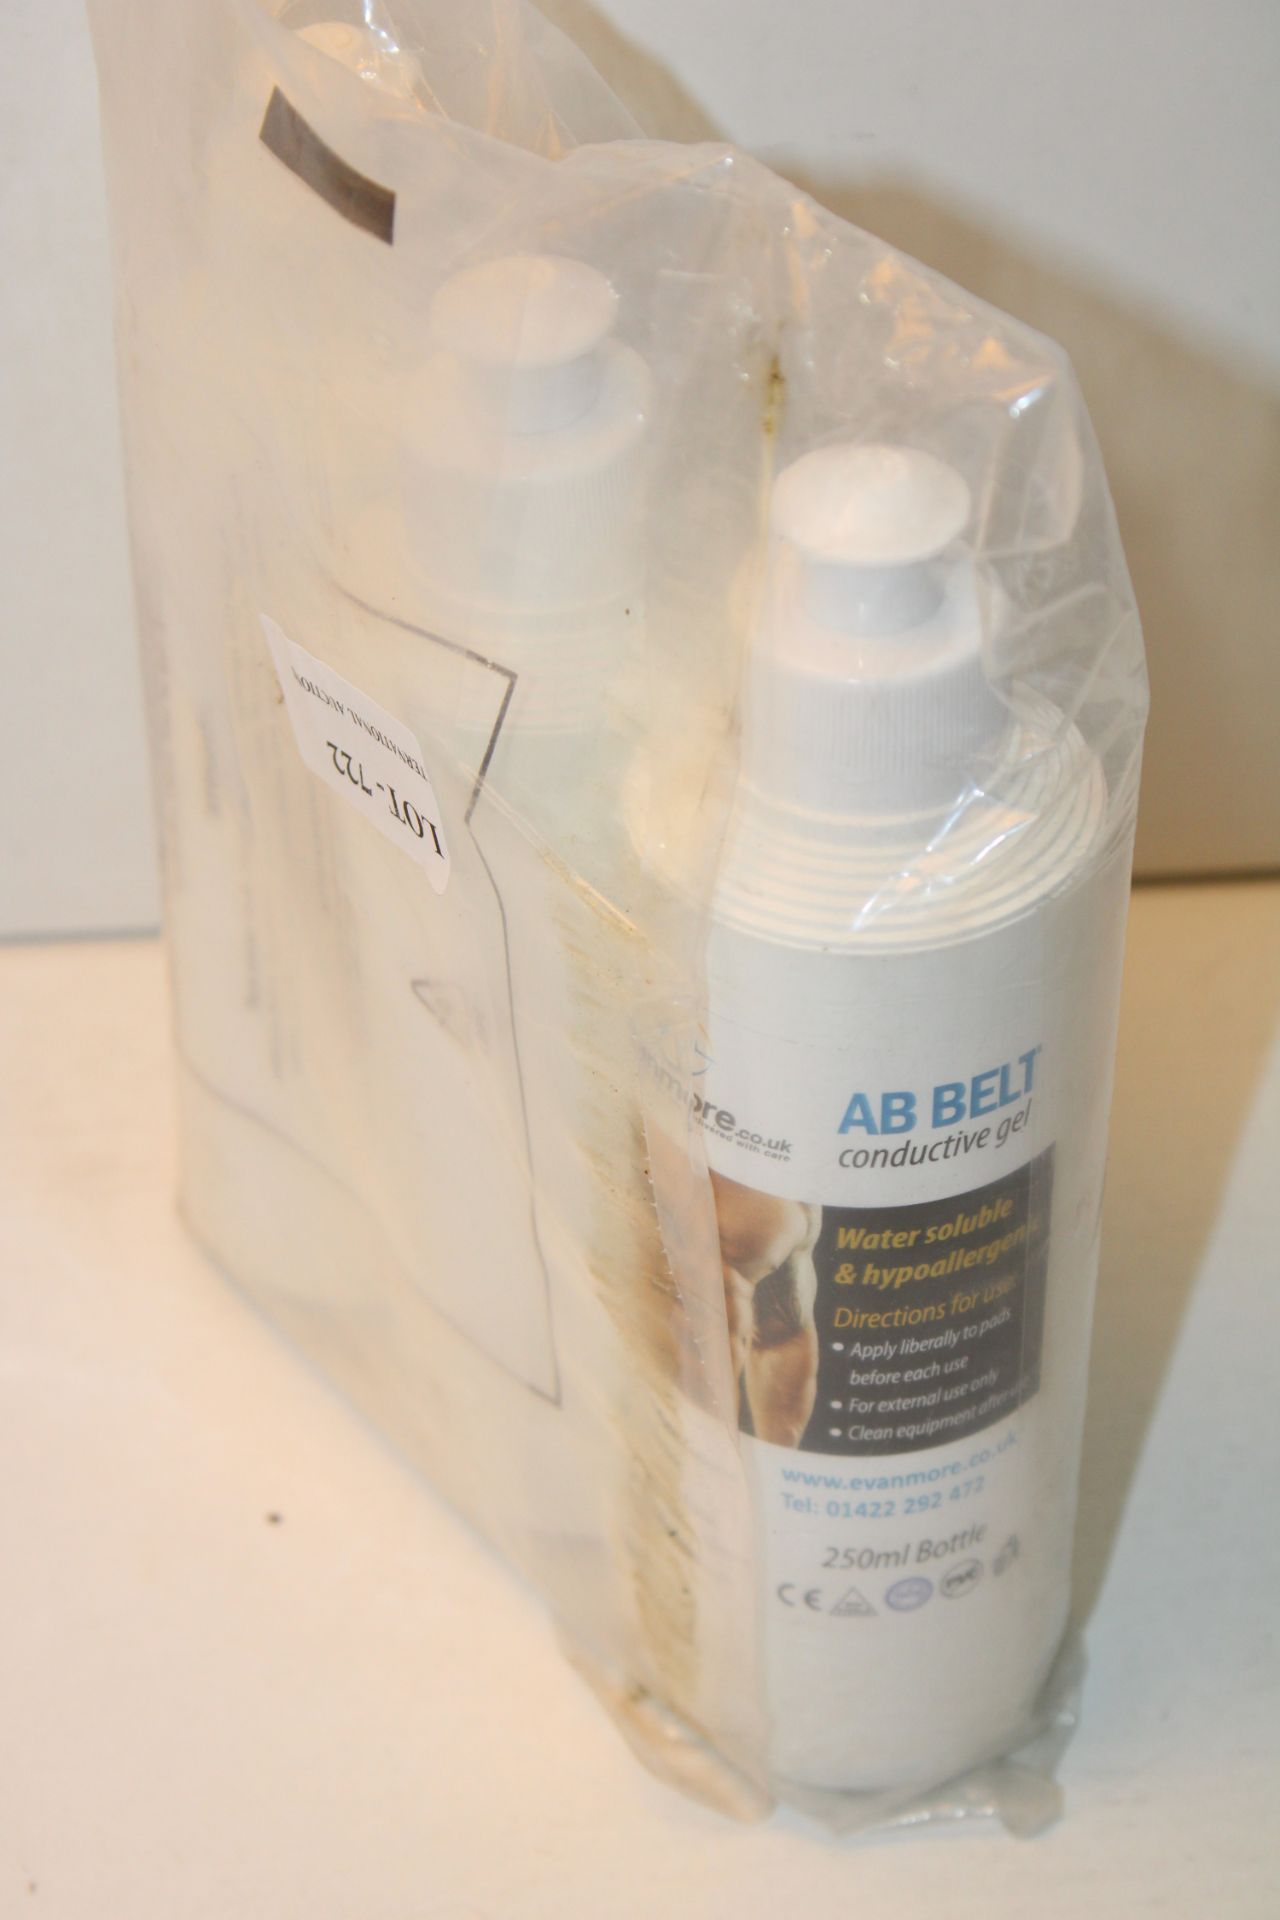 3X AB BELT CONDUCTIVE GEL 250ML BOTTLESCondition ReportAppraisal Available on Request- All Items are